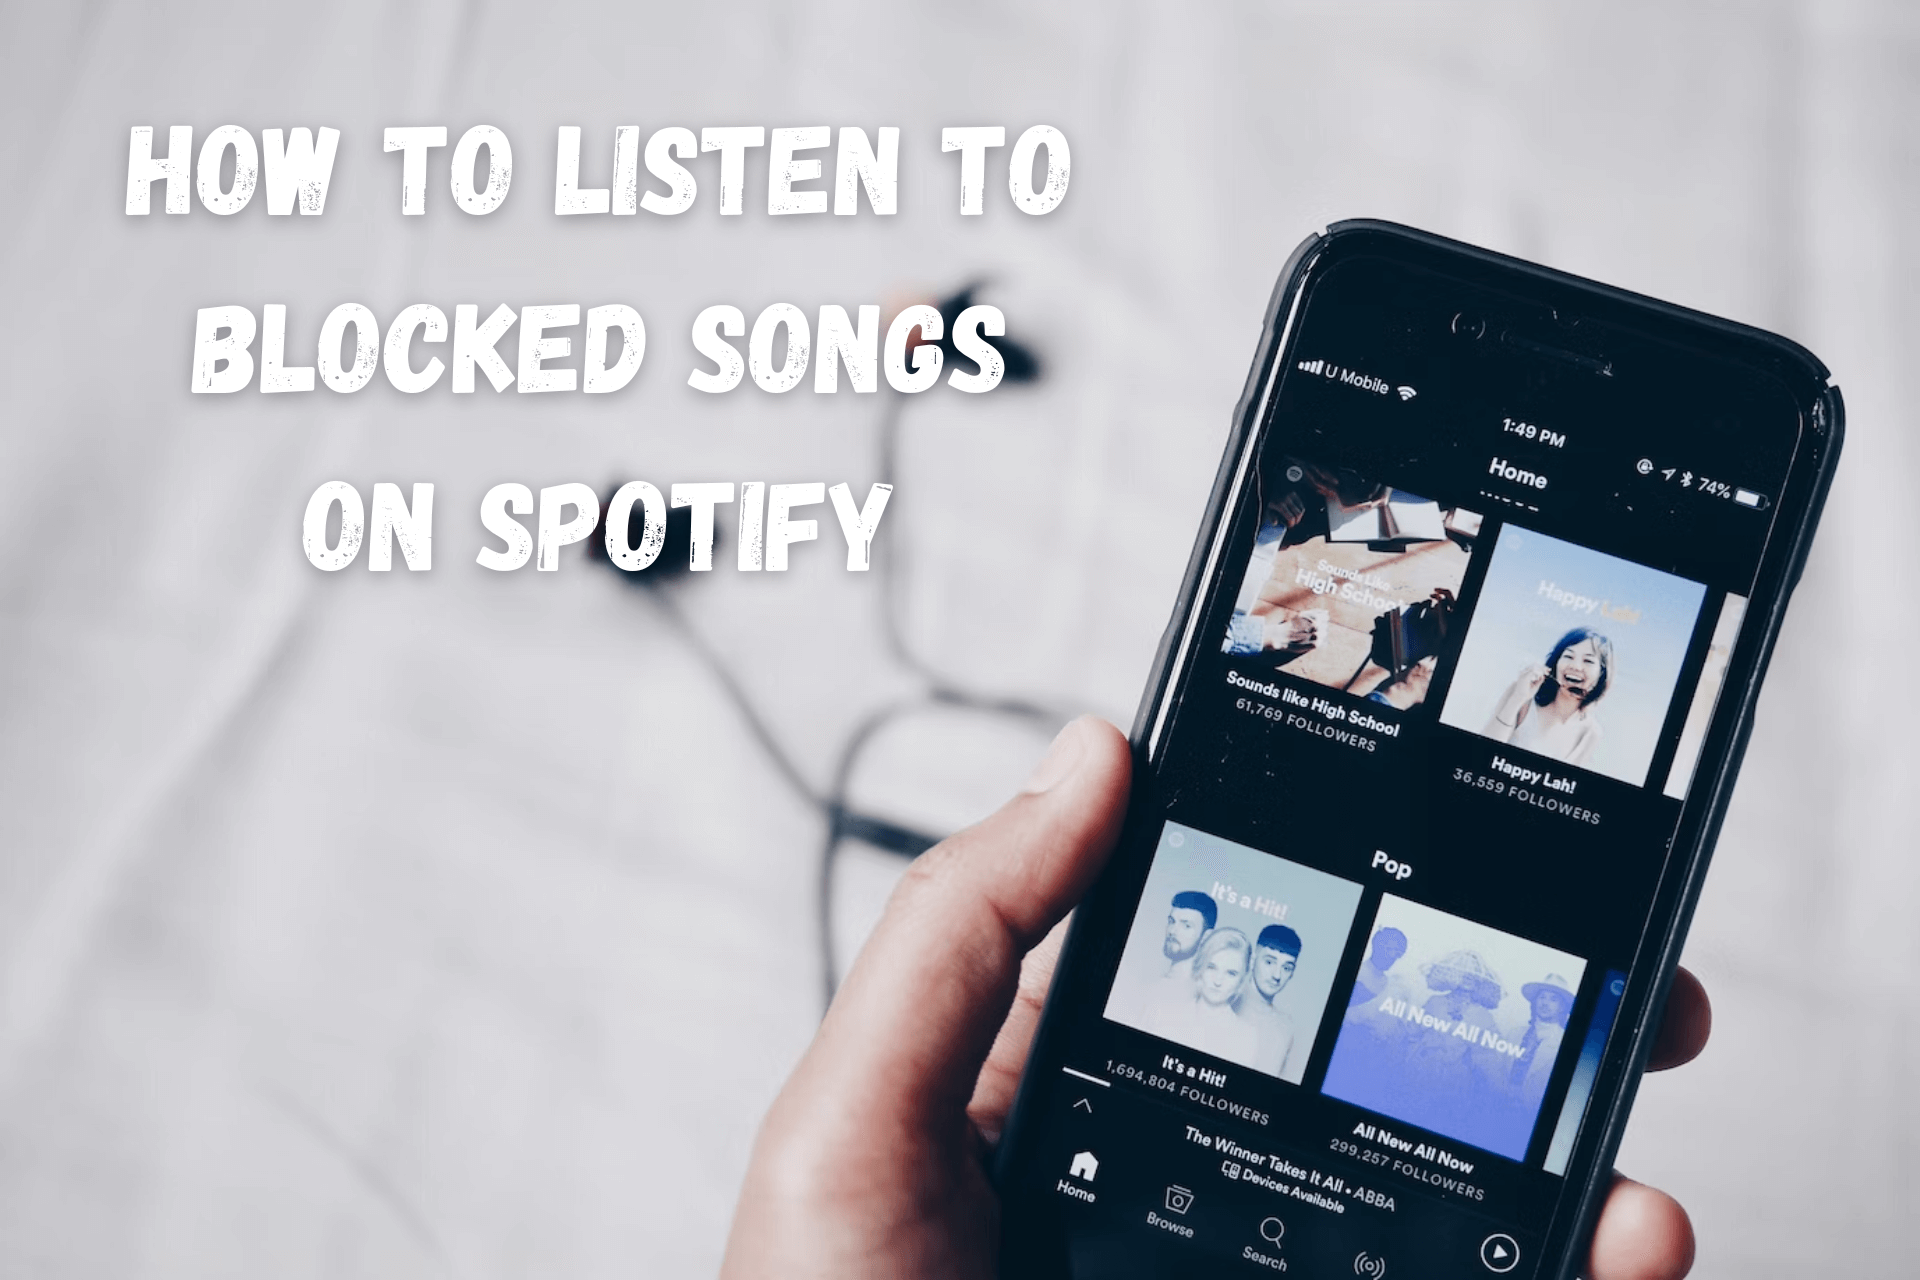 How to Listen to Blocked Songs on Spotify